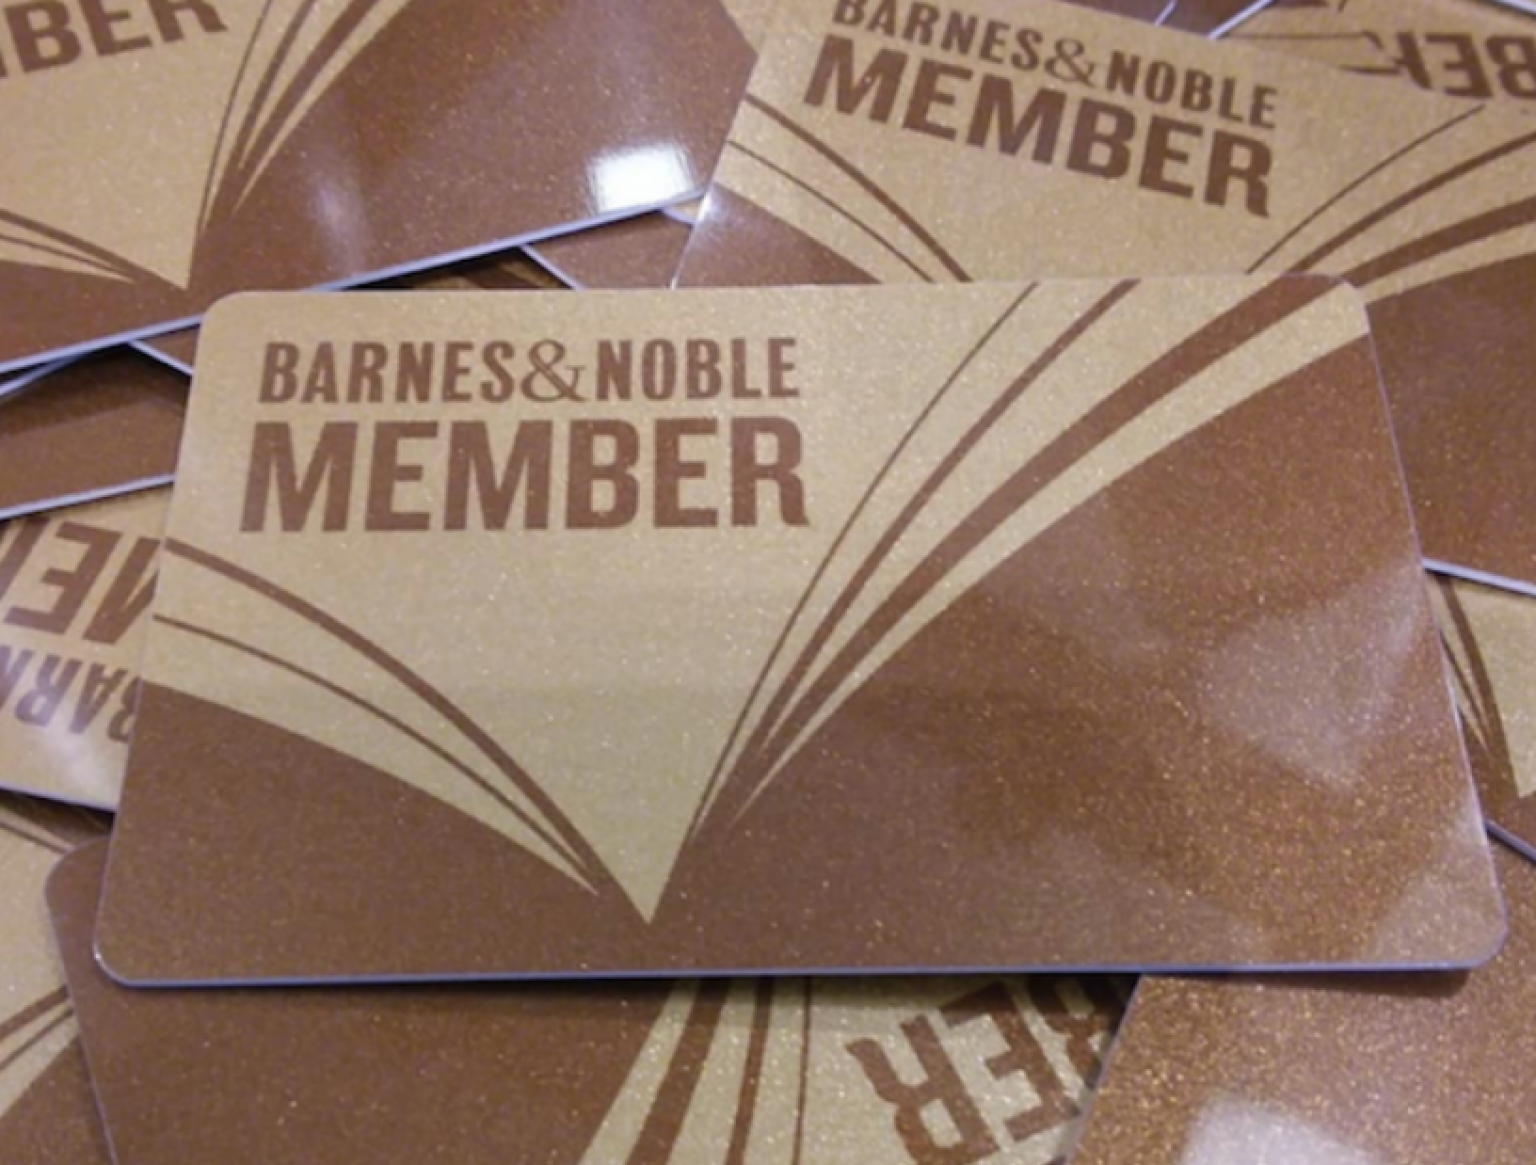 is-a-barnes-and-noble-membership-worth-the-25-yearly-fee